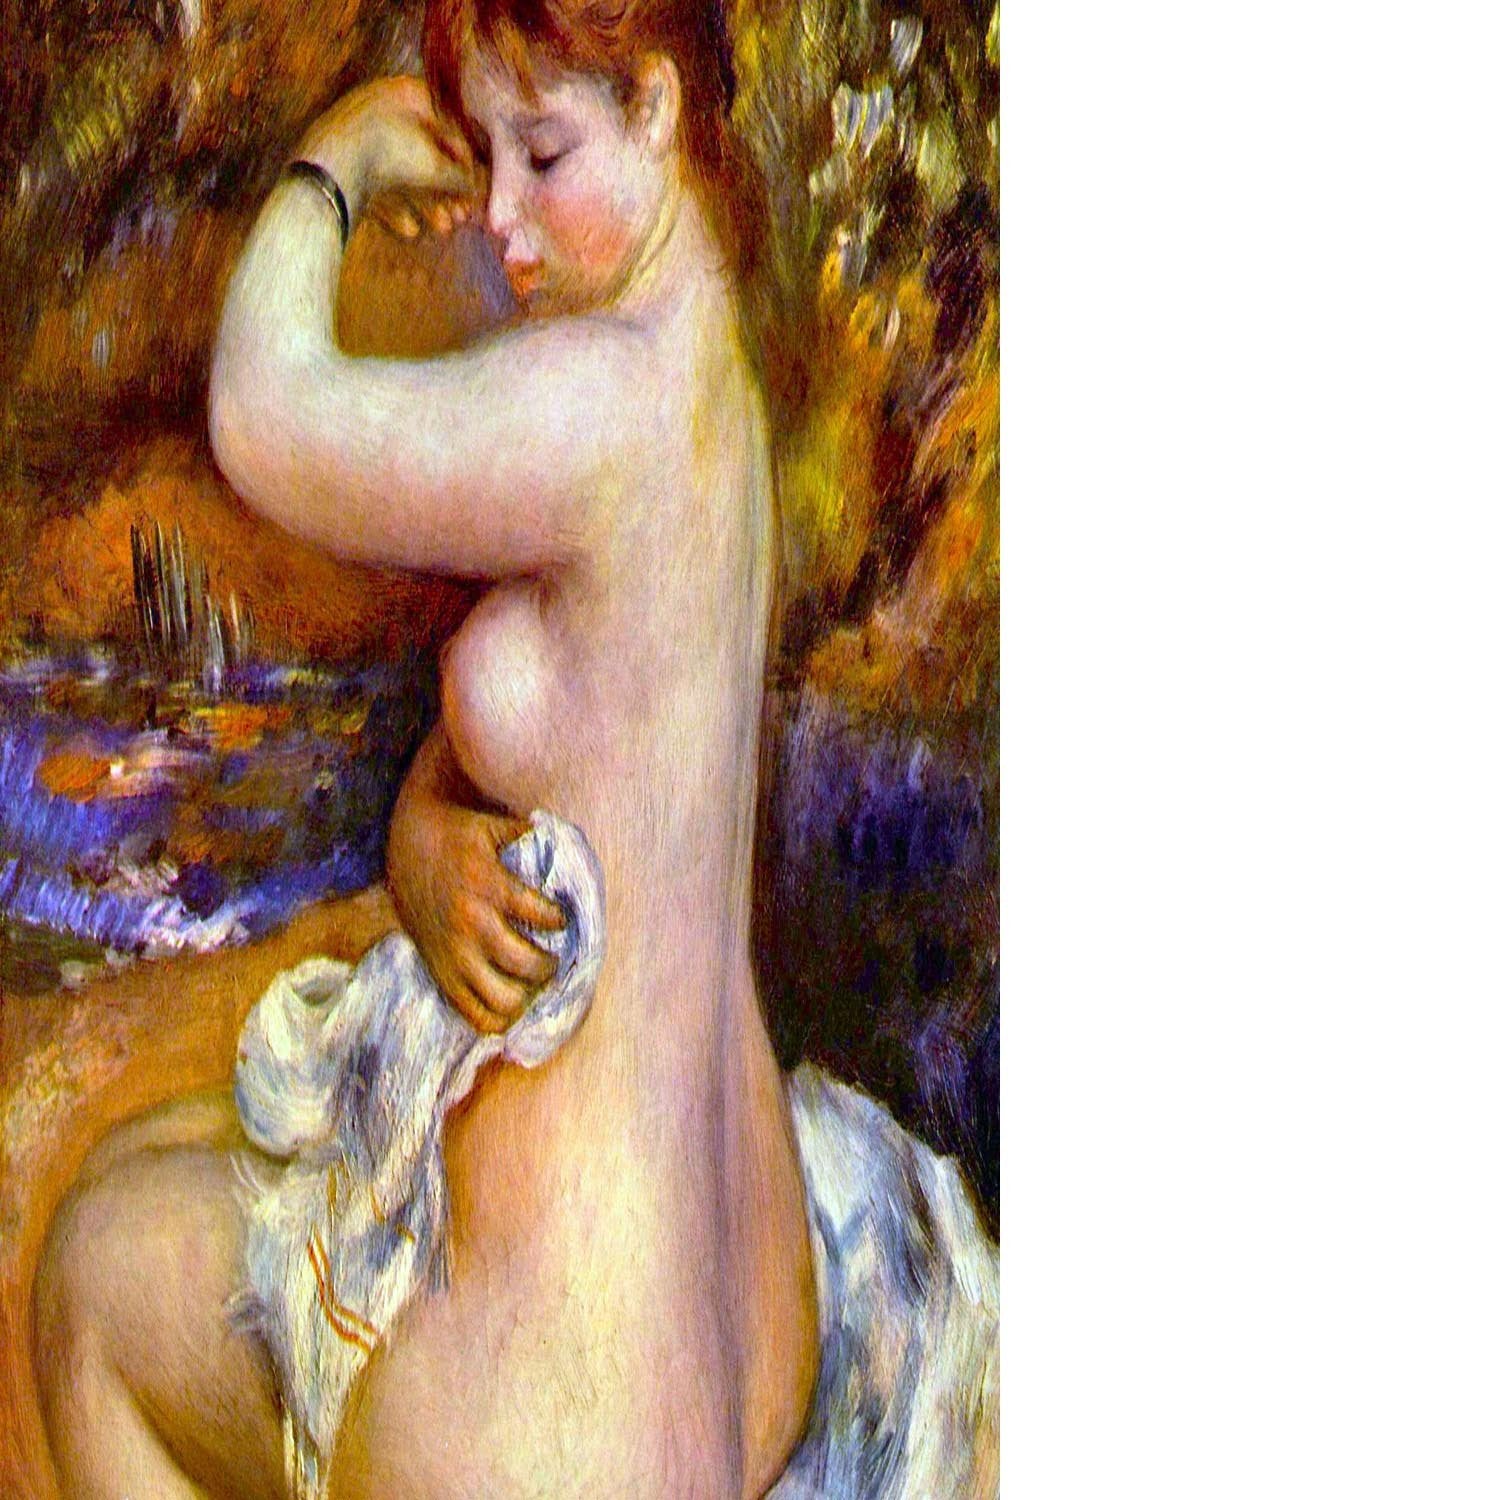 After the bath by Renoir Floating Framed Canvas